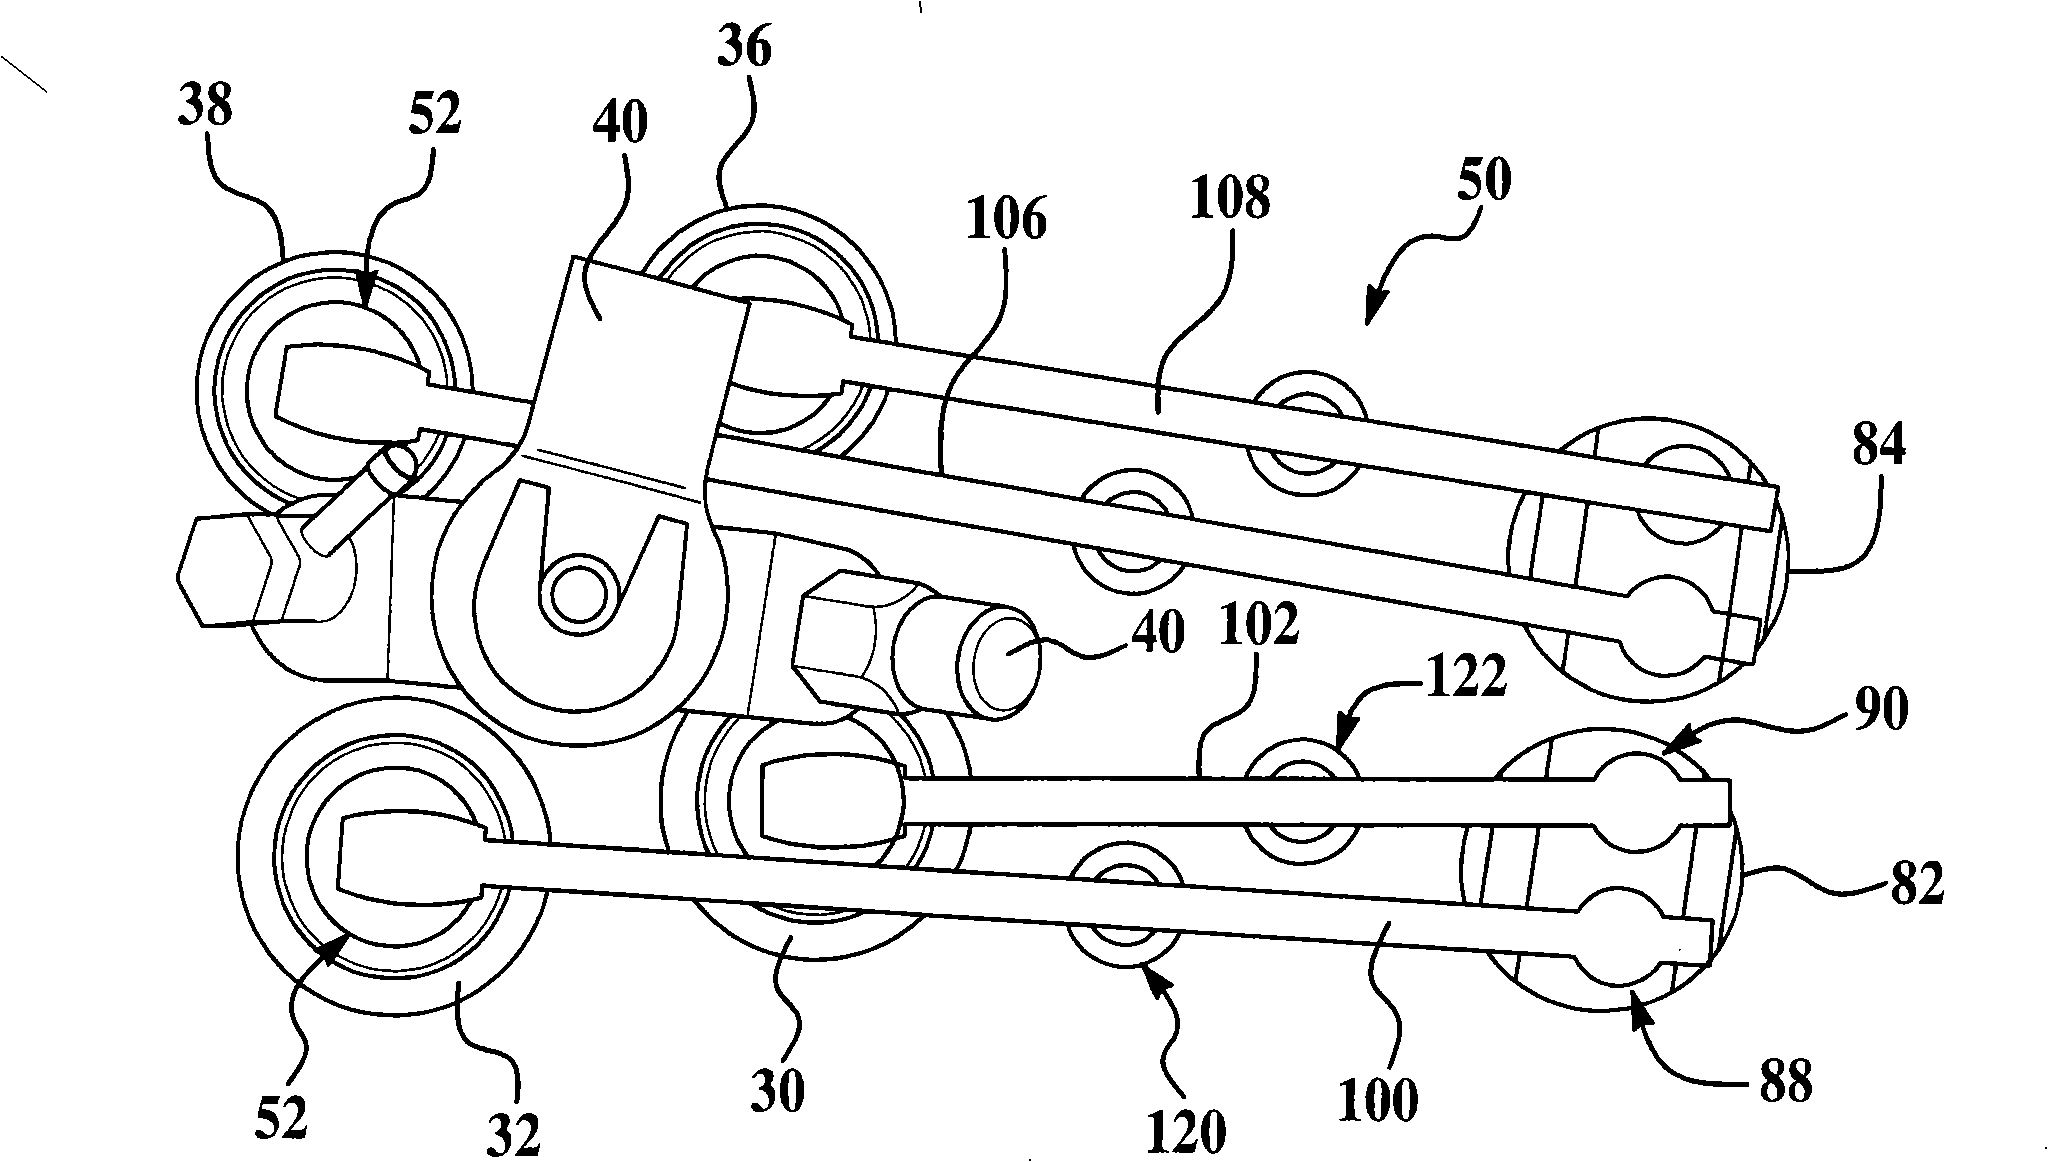 Engine with double-push bar tappet rod and stand-alone interstice regulator, and air valve mechanism thereof